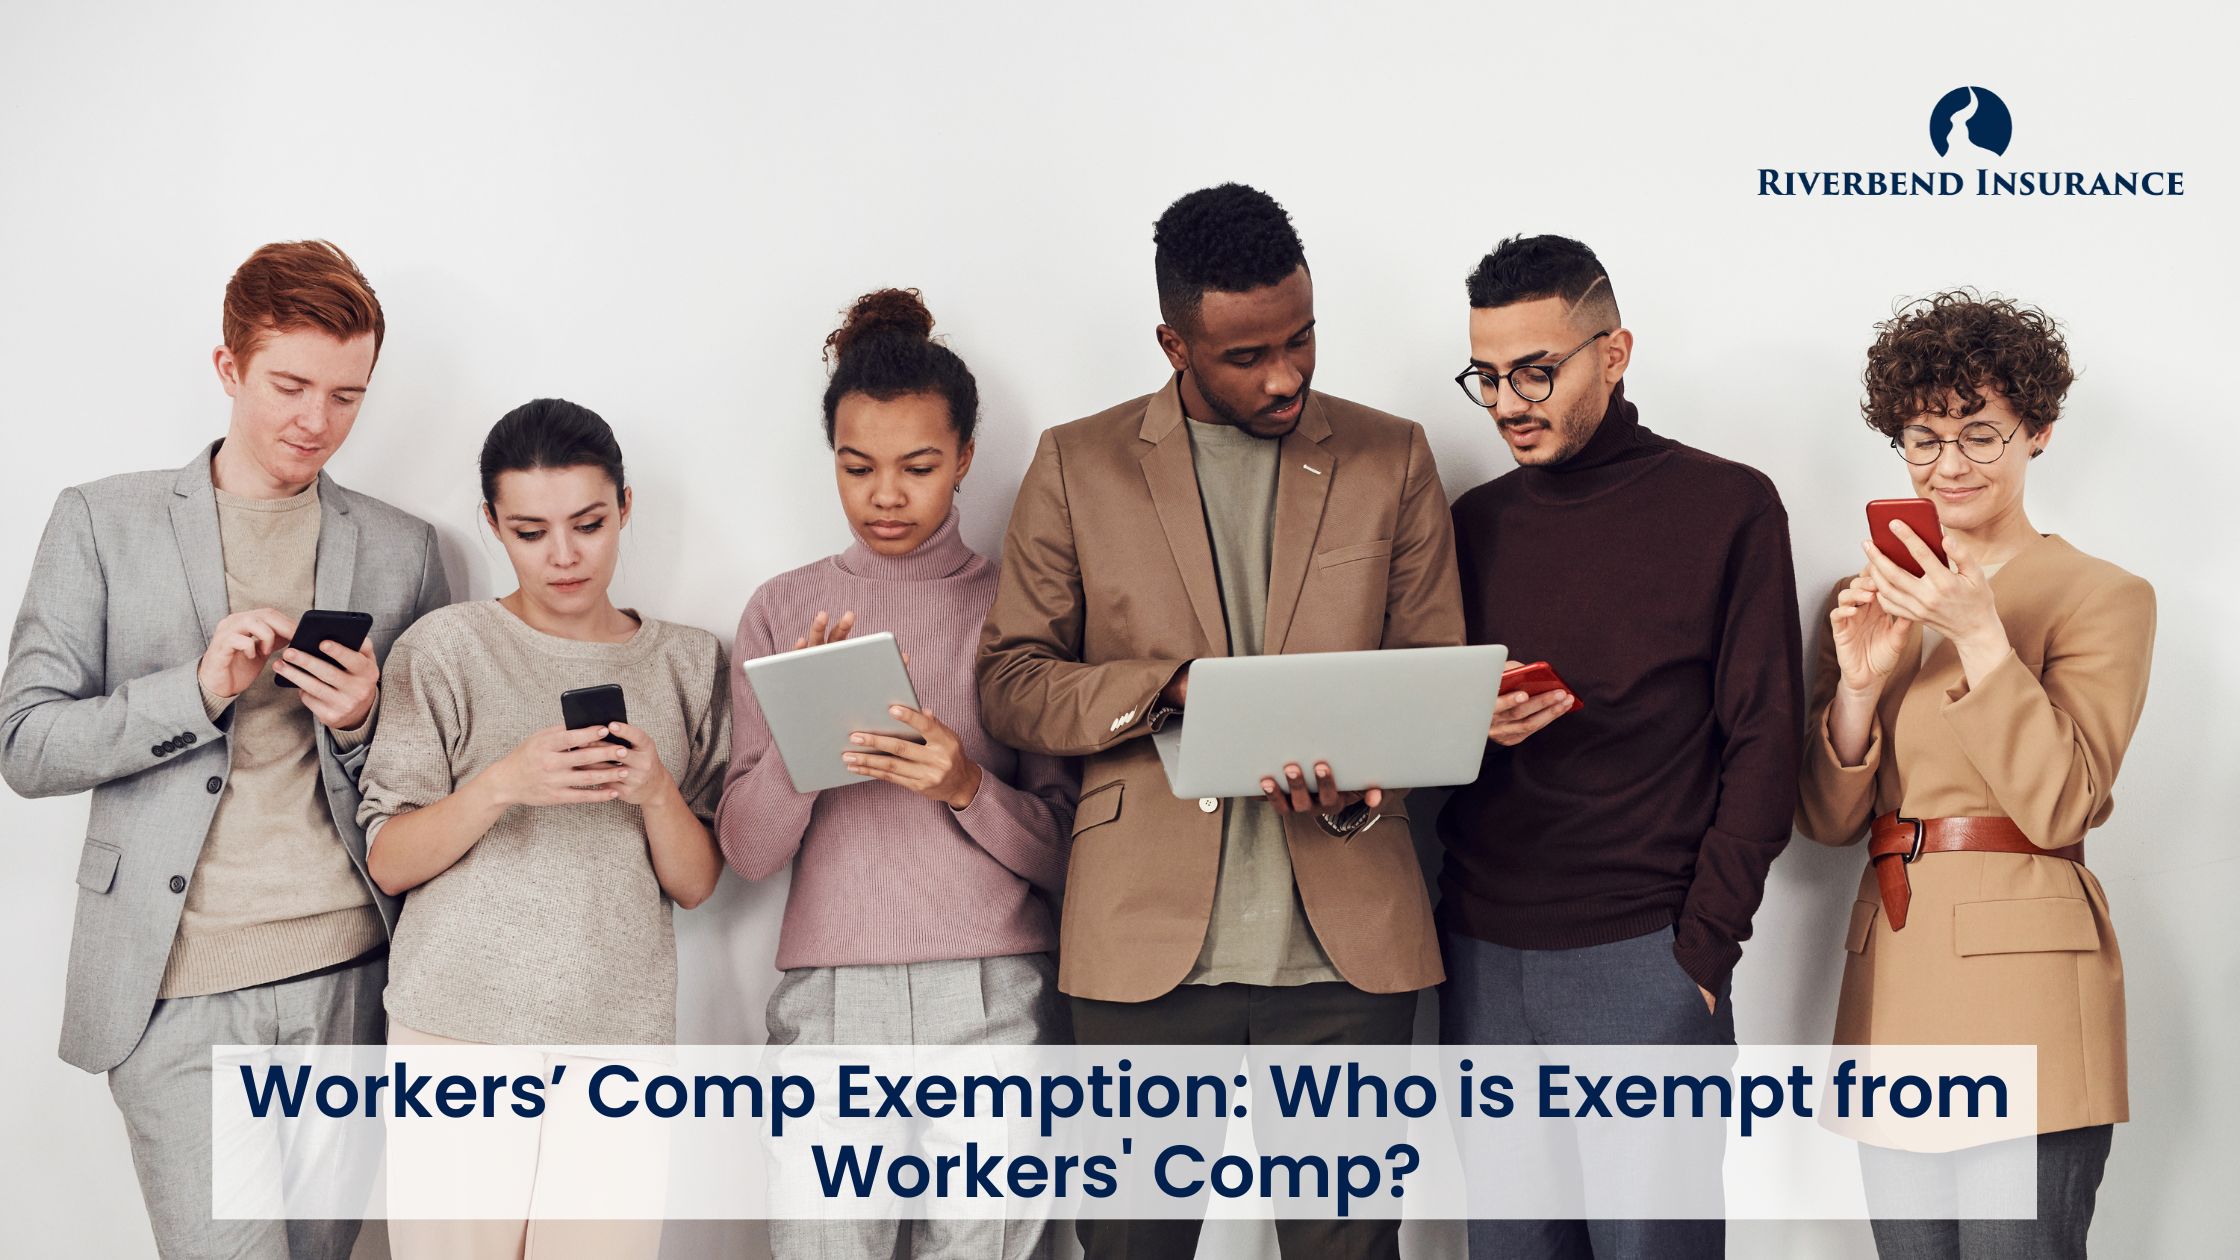 Workers’ Comp Exemption: Who is Exempt from Workers' Comp?